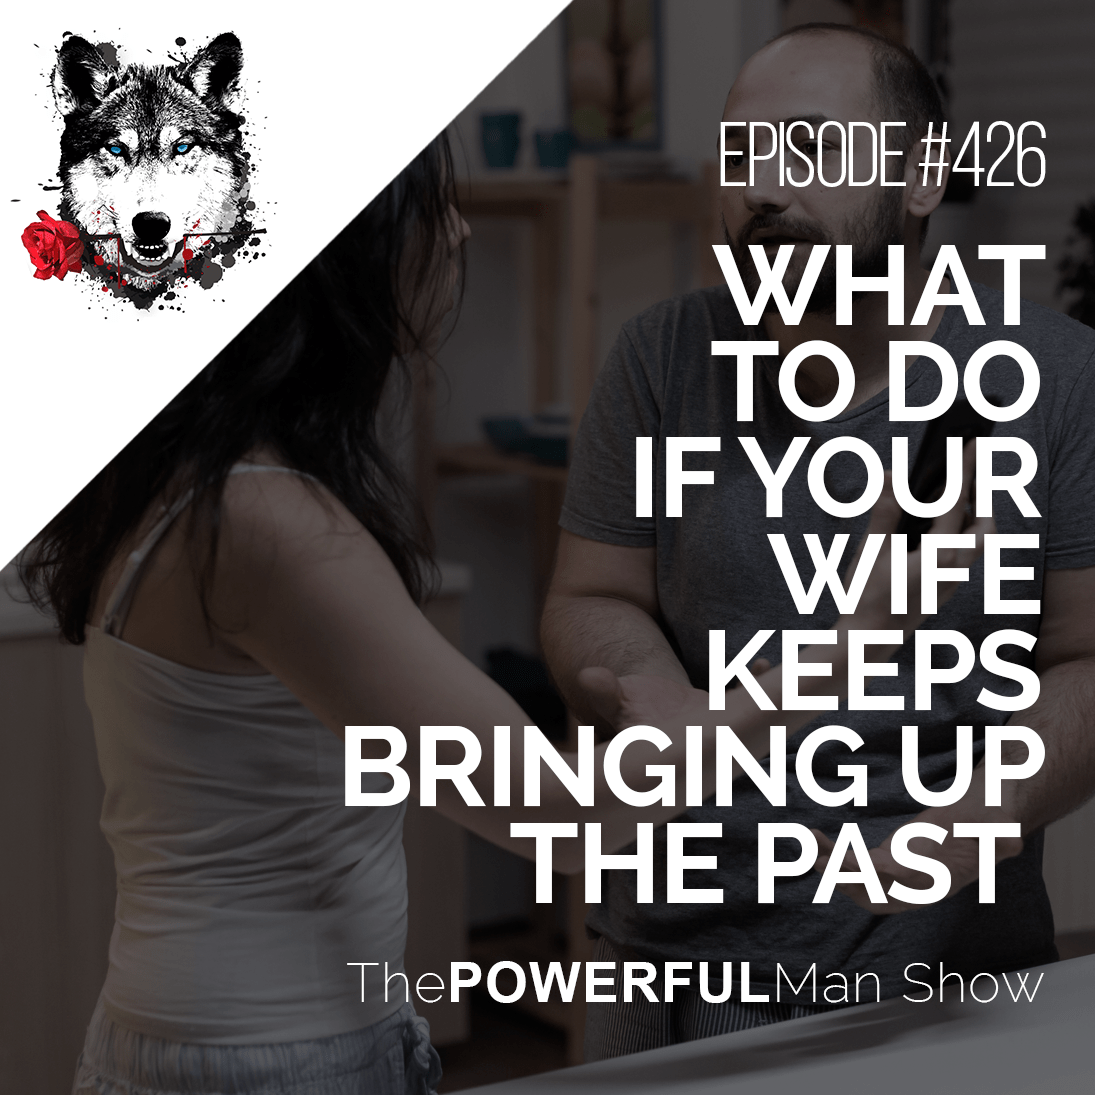 What To Do If Your Wife Keeps Bringing Up The Past